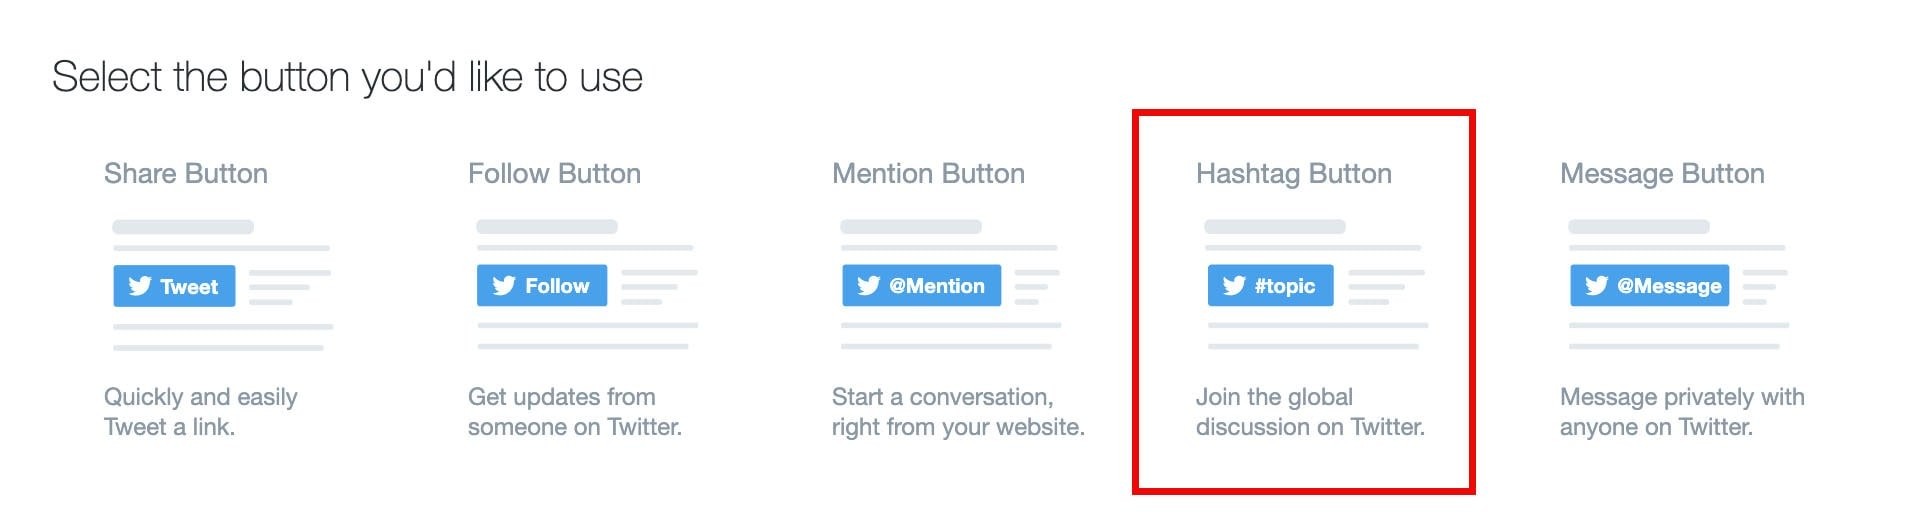 hashtag button on twitter developer page